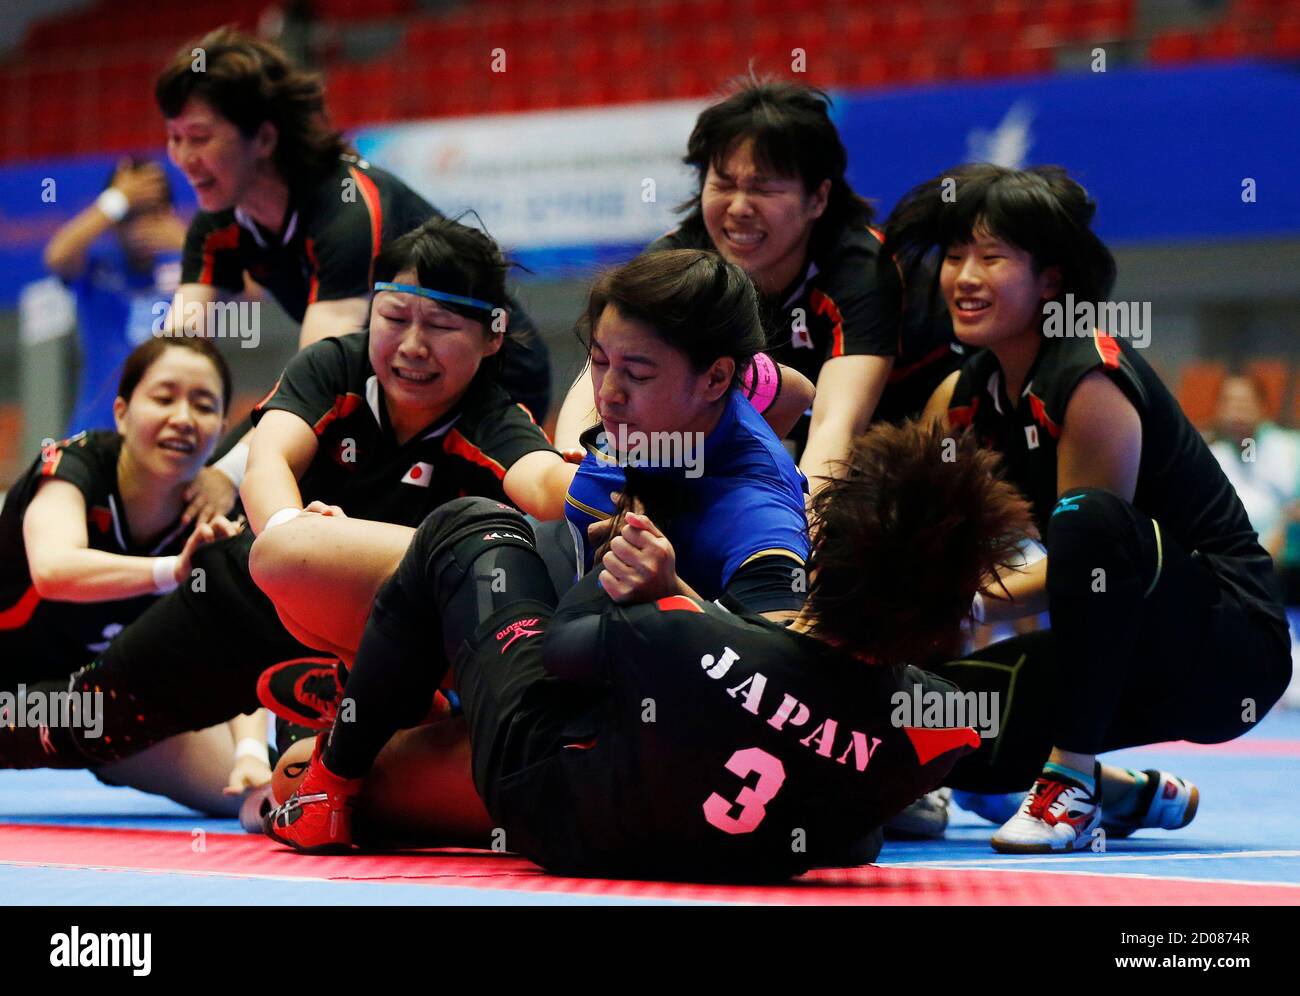 Japan's players tackle Thailand's captain Alisa Limsamran during their women's preliminary kabaddi match in the Songdo Global University Gymnasium at the 17th Asian Games in Incheon September 29, 2014.  REUTERS/Olivia Harris (SOUTH KOREA - Tags: SPORT) Stock Photo